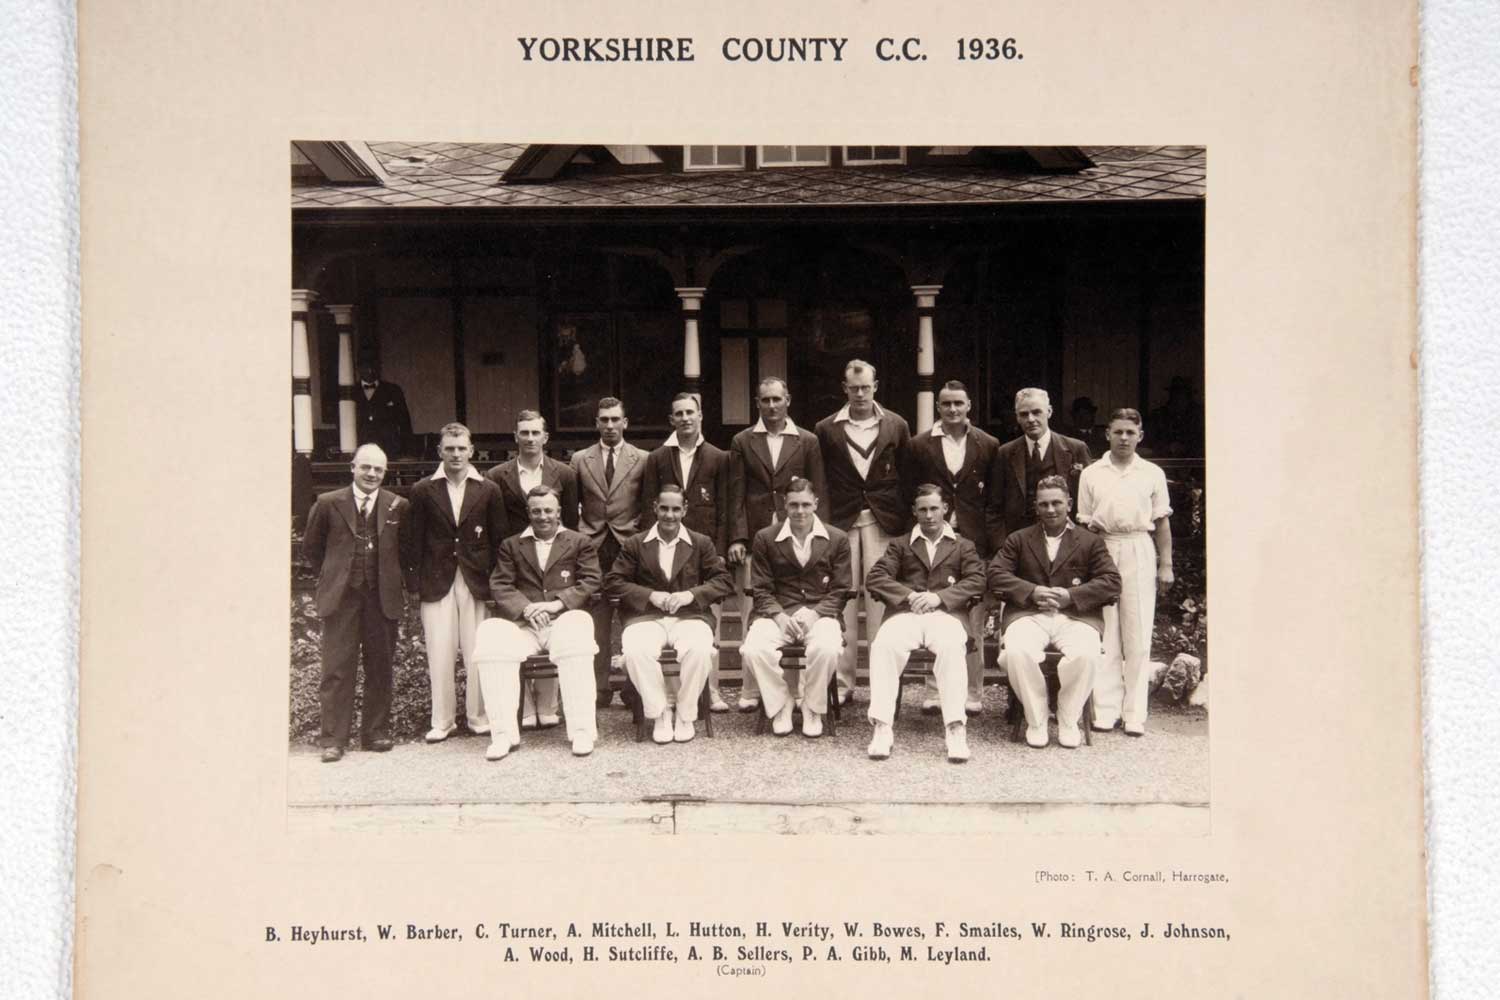 Yorkshire County C.C. 1936. Original mono photograph of the Yorkshire team, seated and standing in